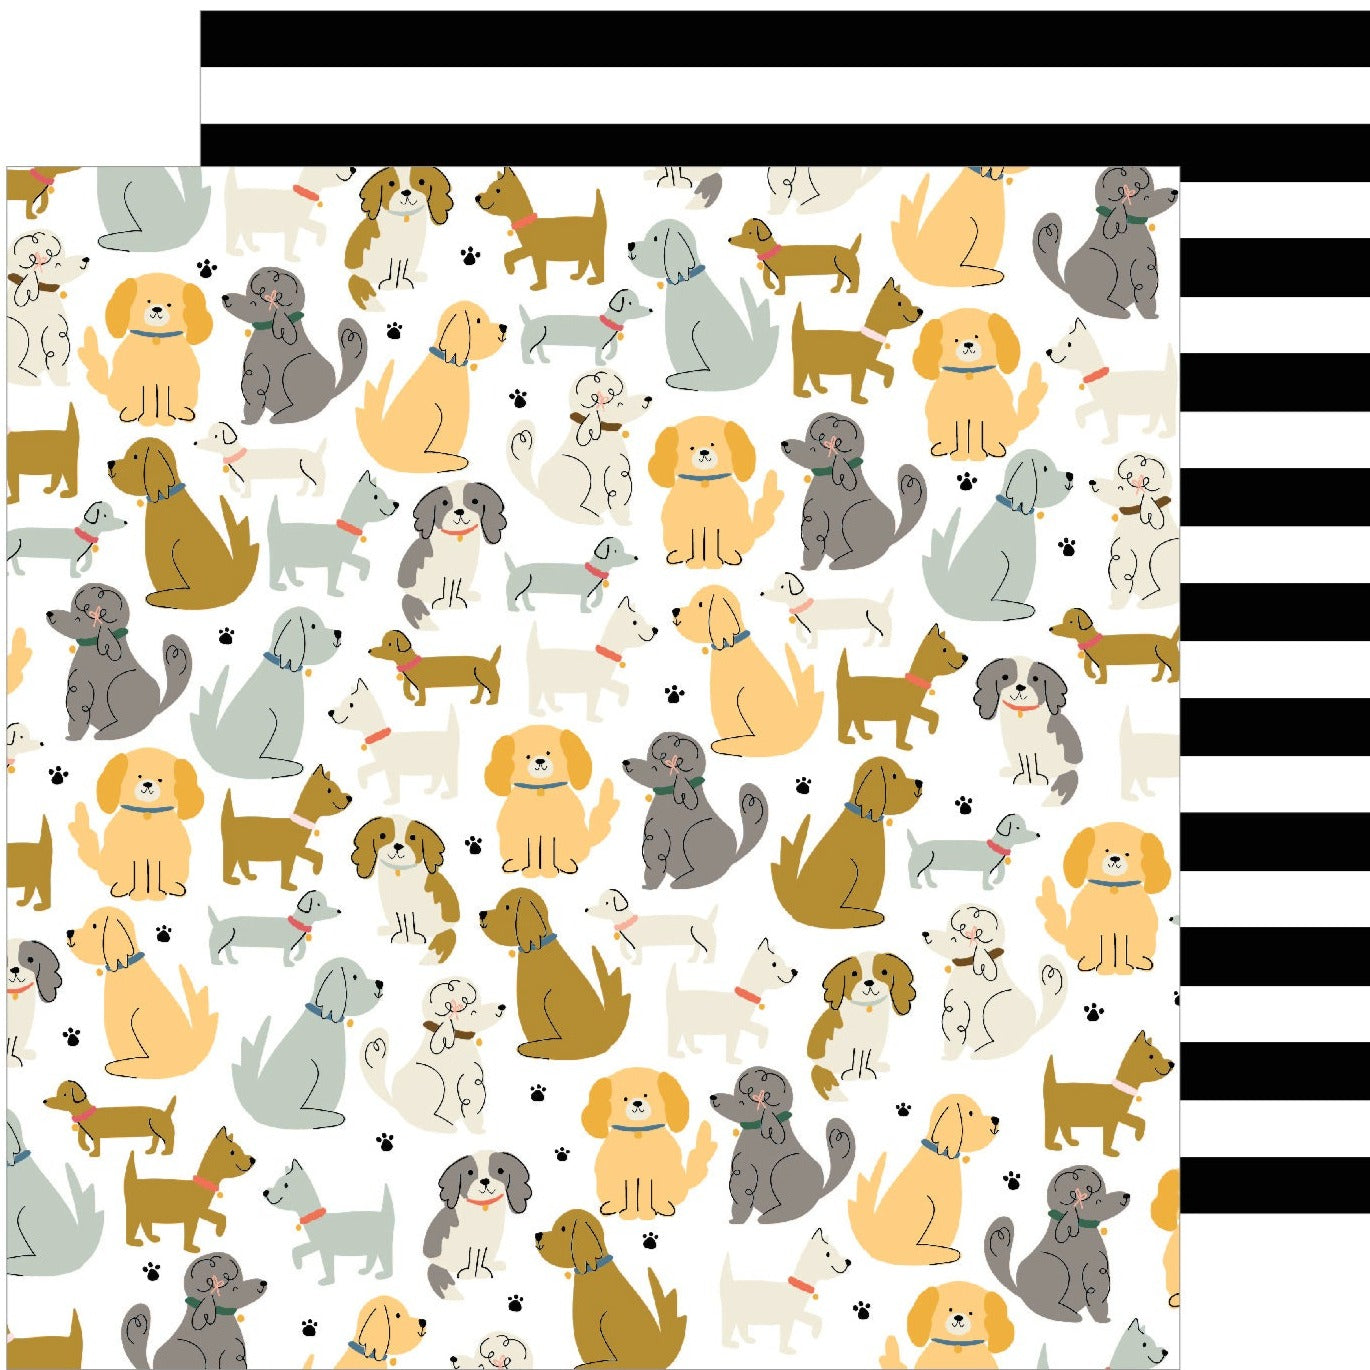 Multi-Colored (Side A - different breeds of dogs on a white background, Side B - bold black and white stripes pattern)